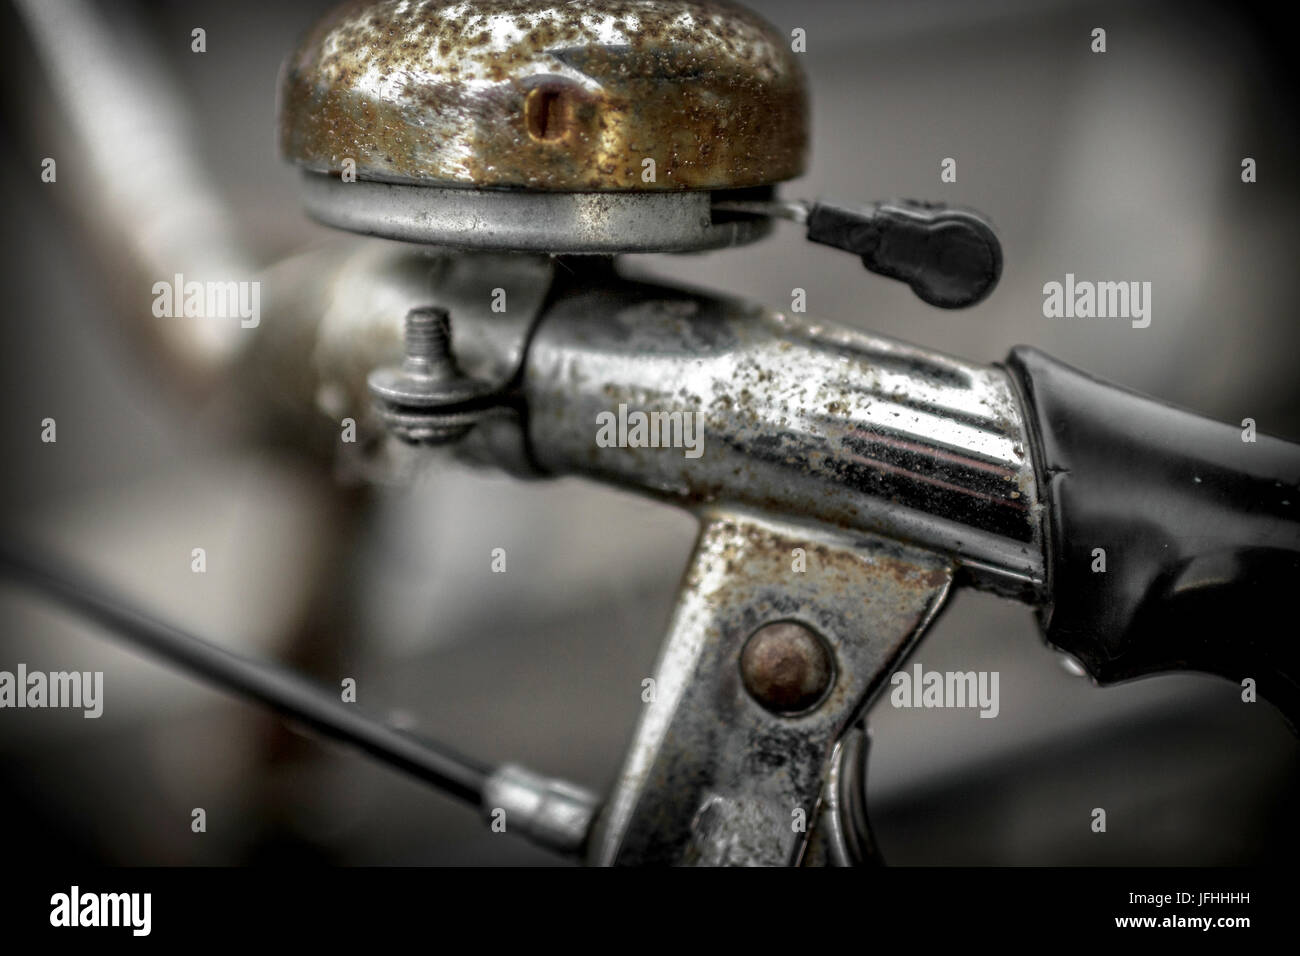 Rusty bicycle bell Stock Photo